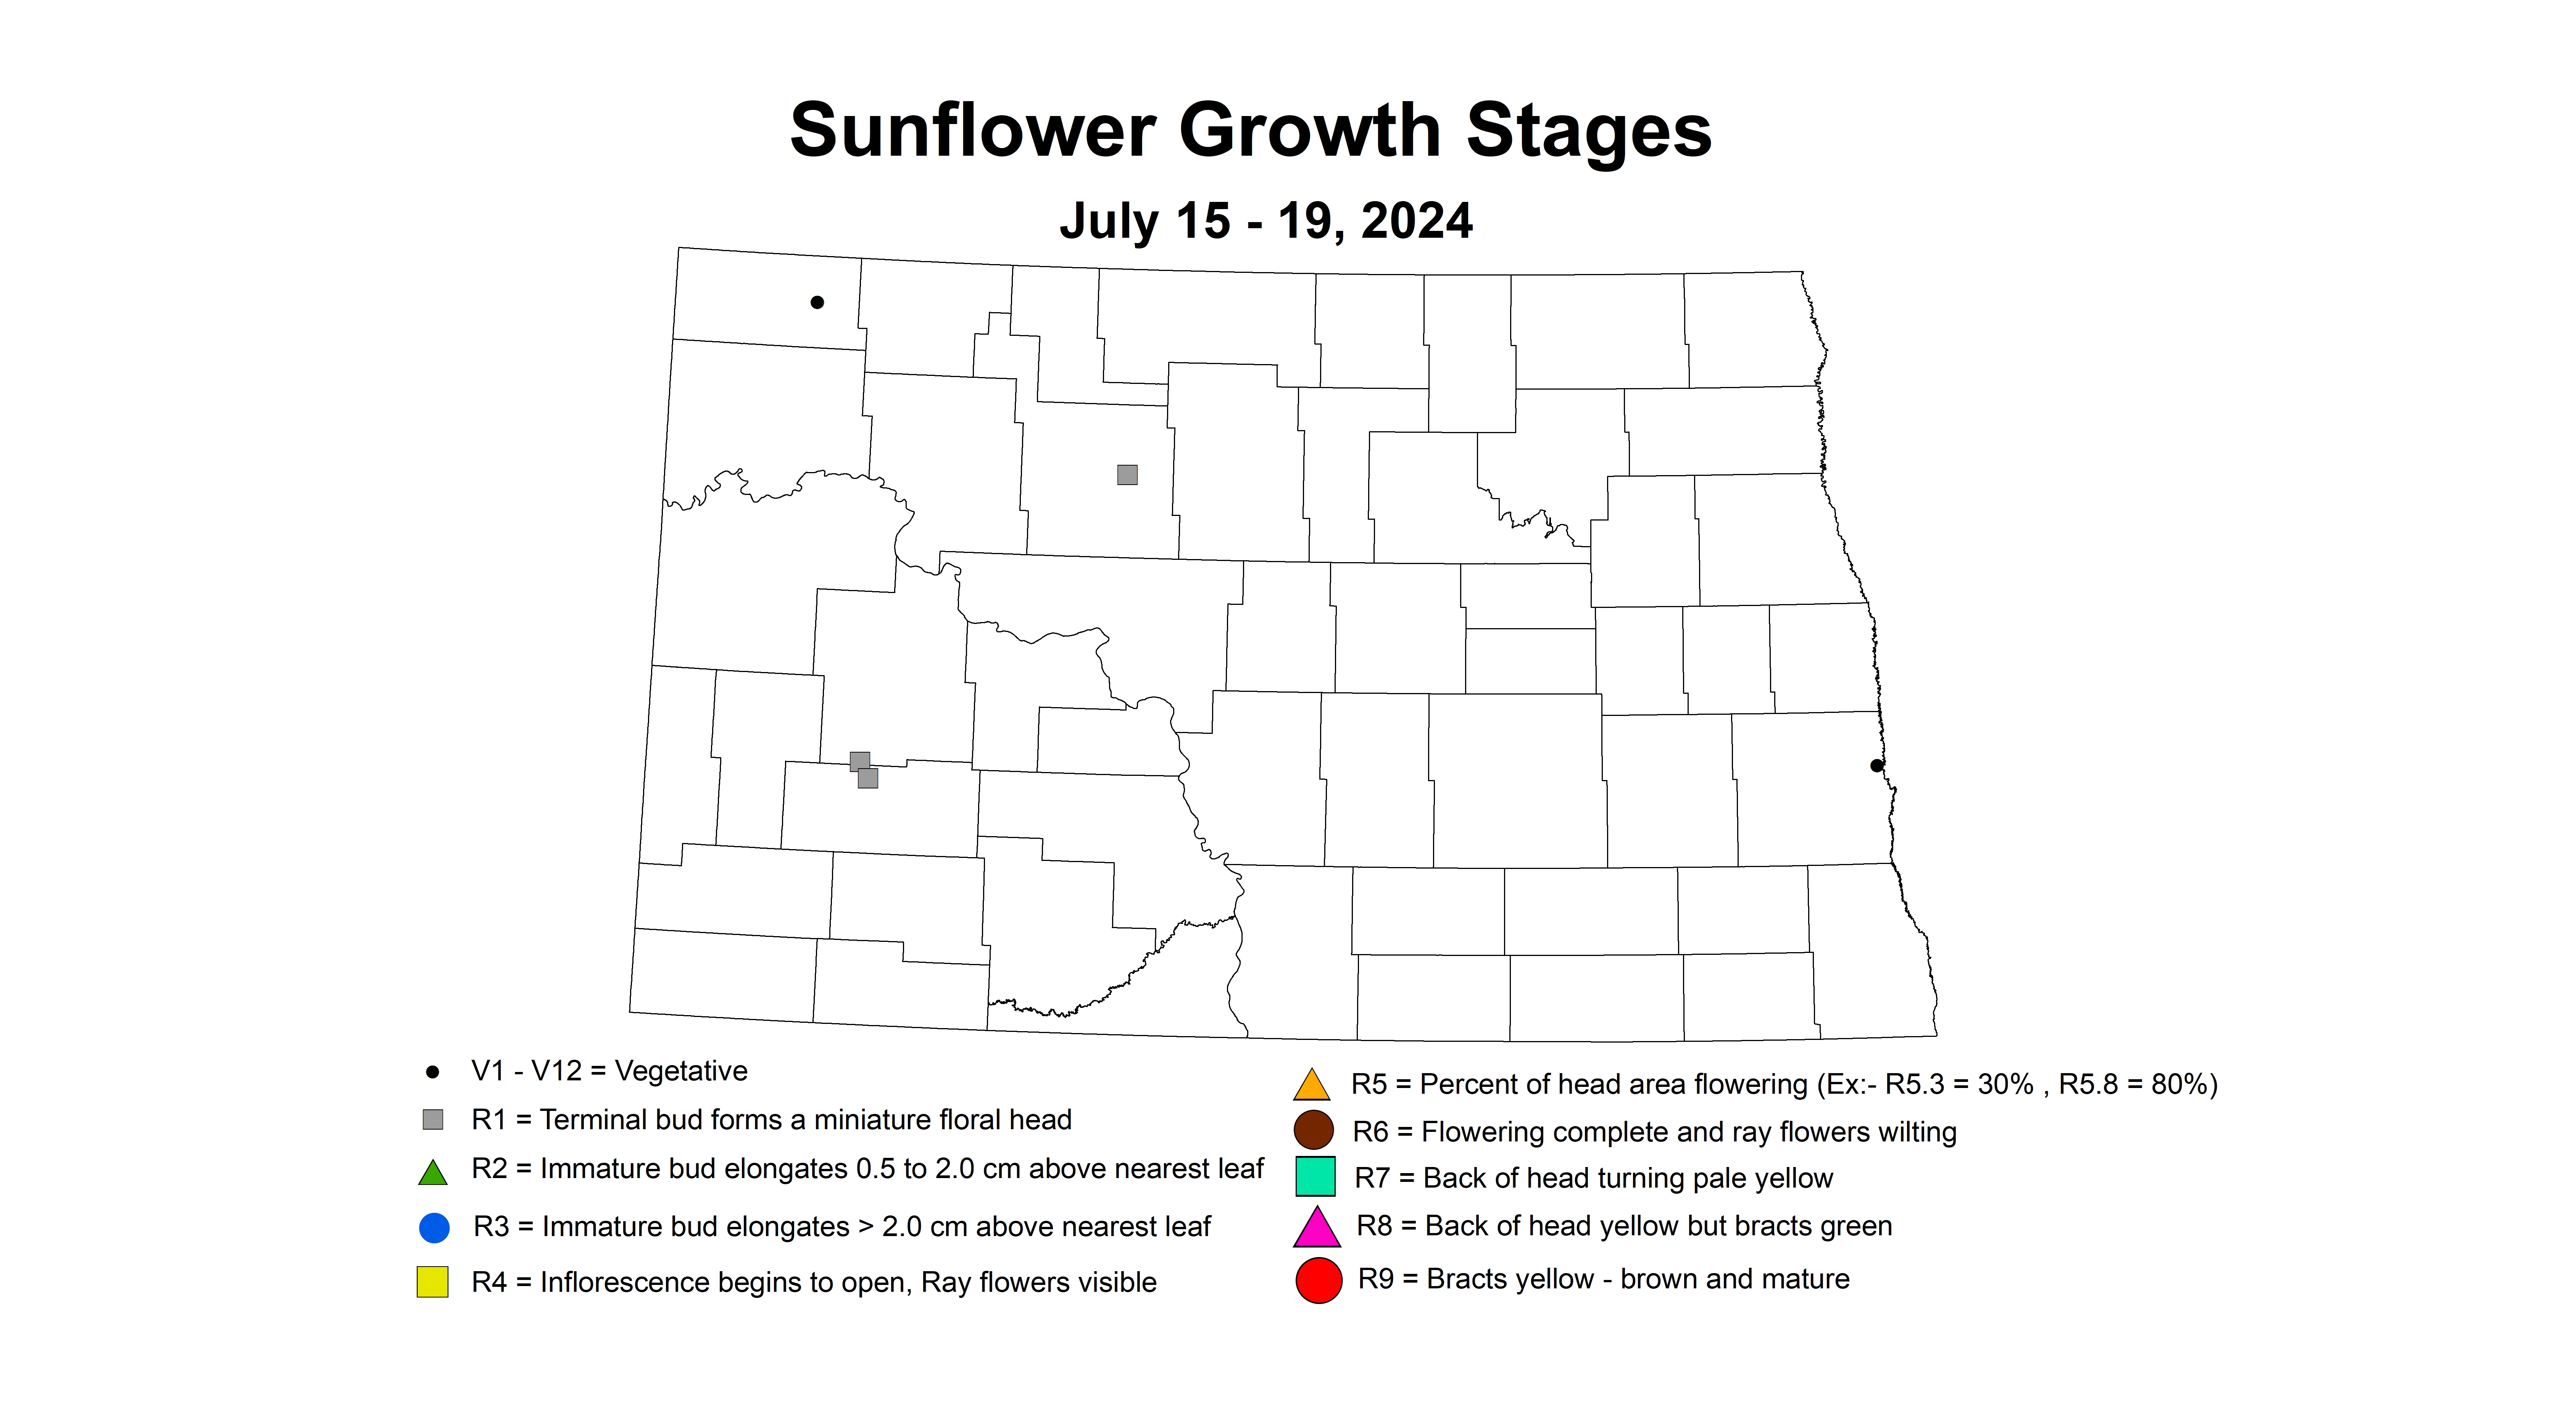 sunflower growth stages July 15 - 19 2024